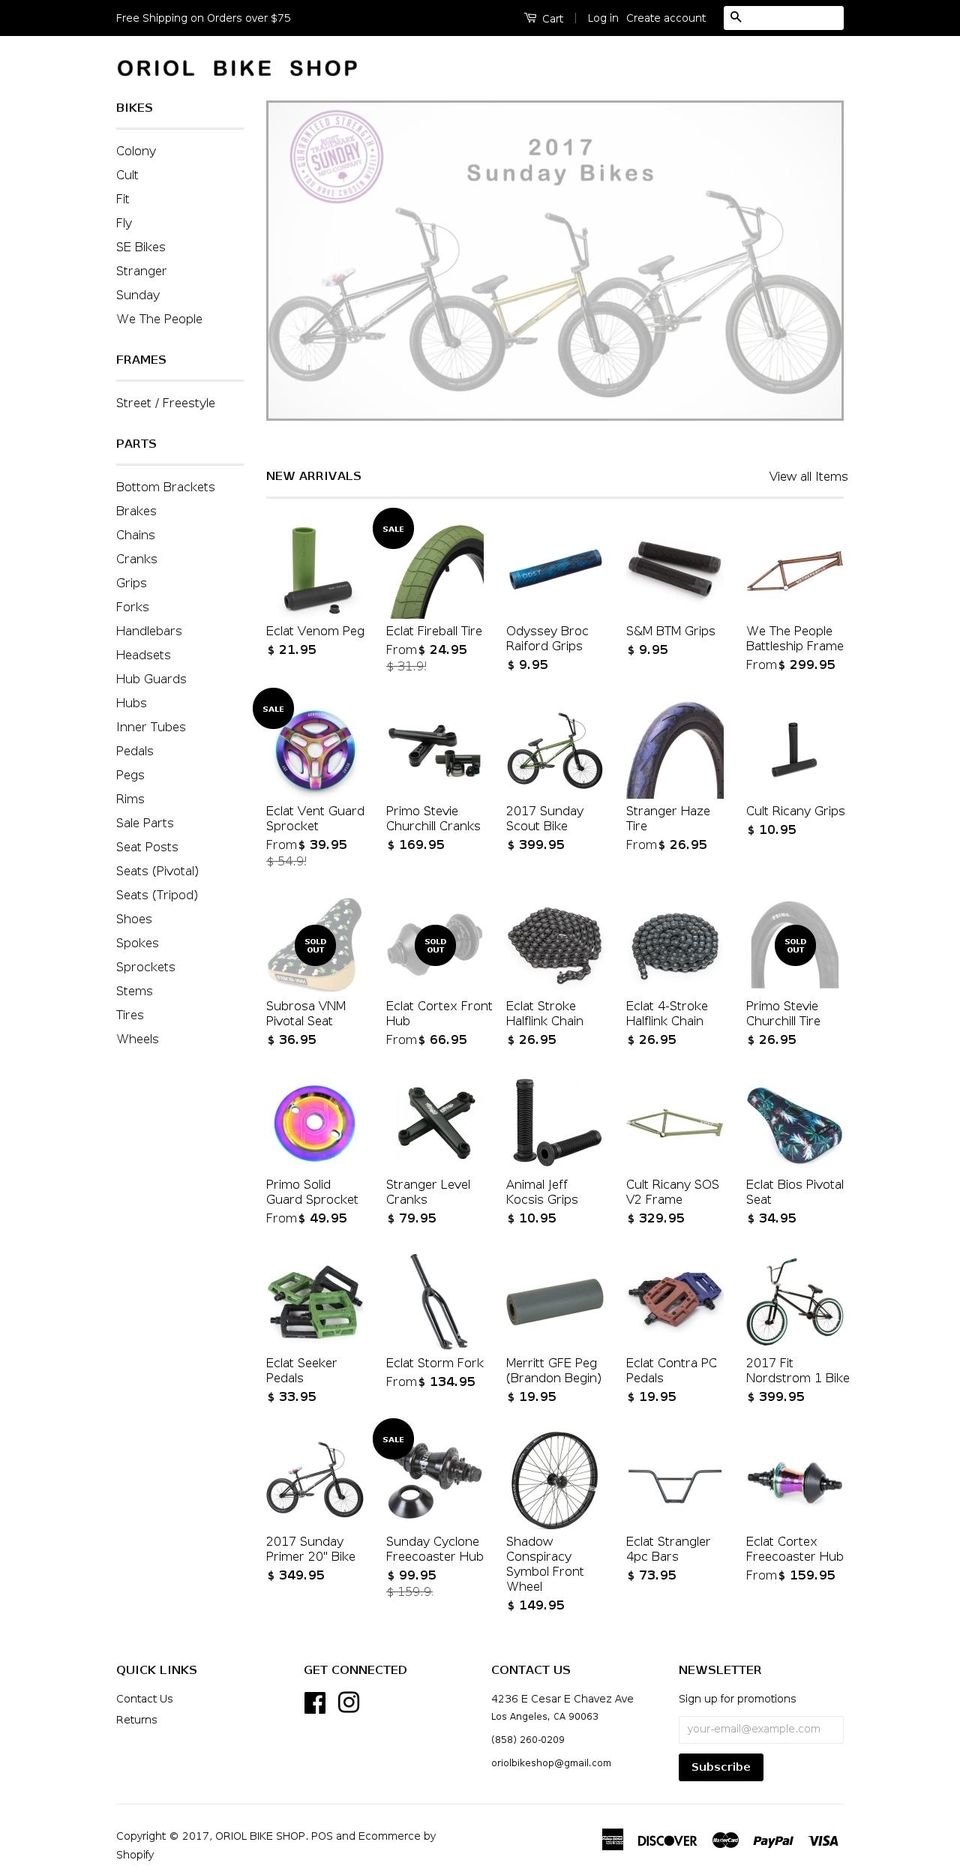 classic Shopify theme site example oriolbikeshop.com